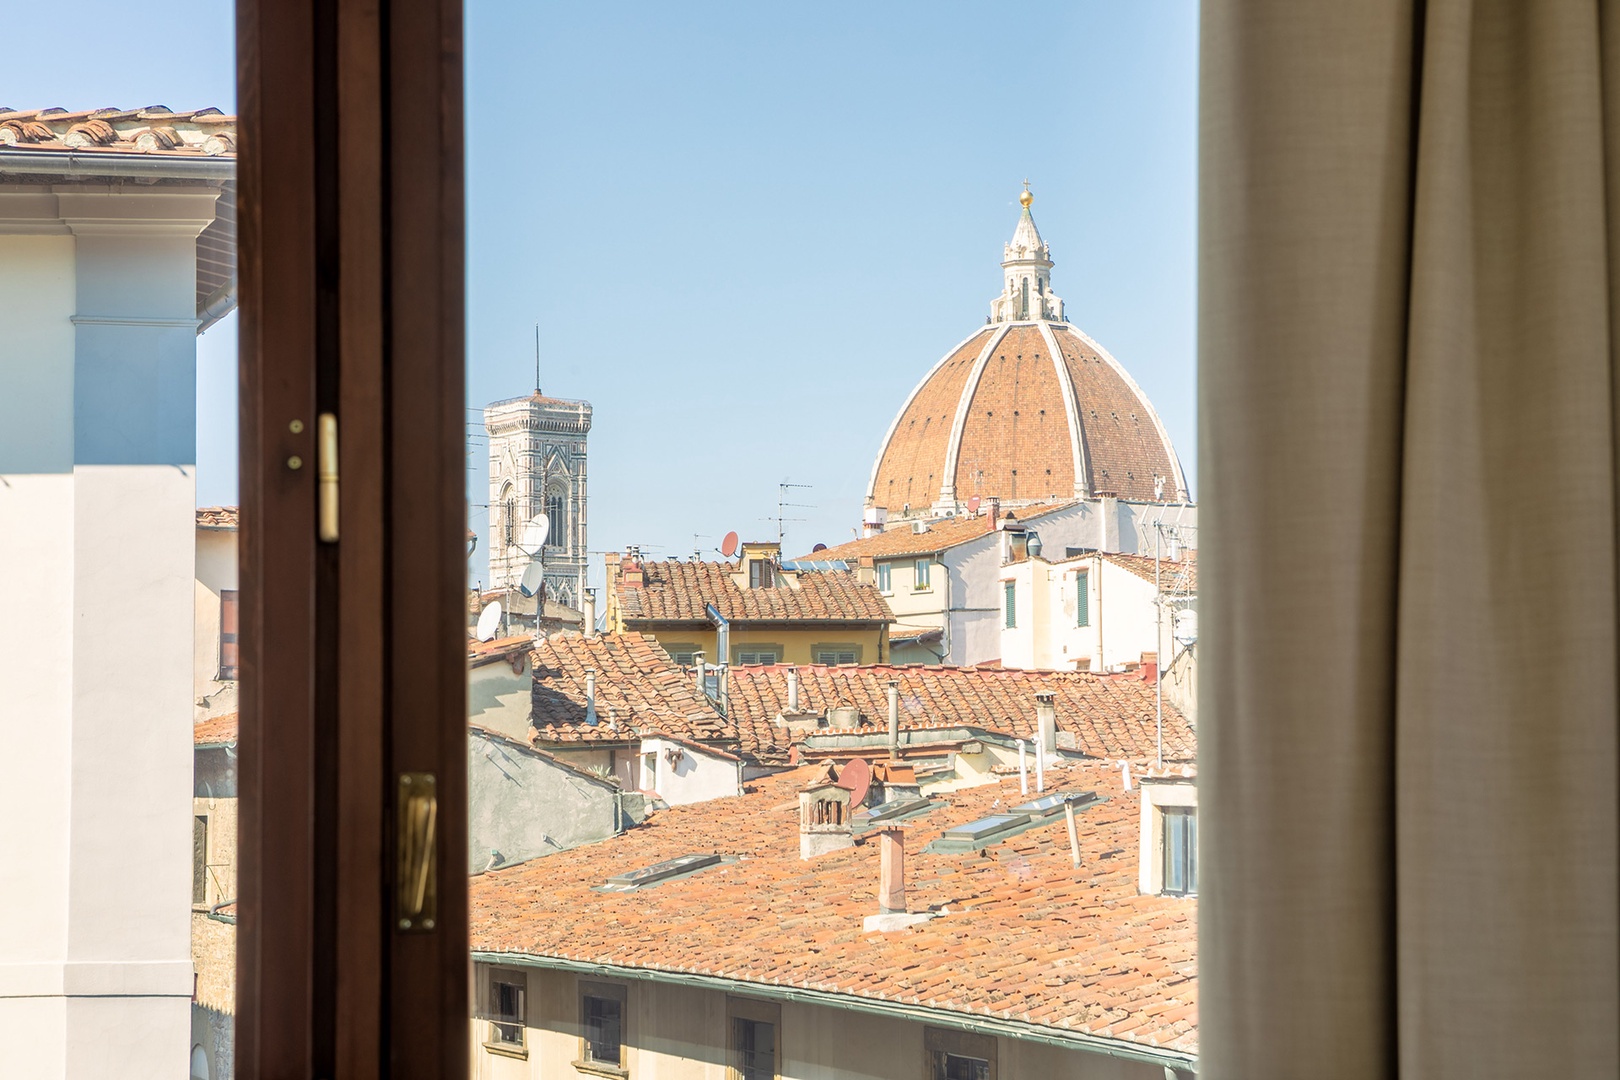 Spectacular view of the Duomo from the living room.